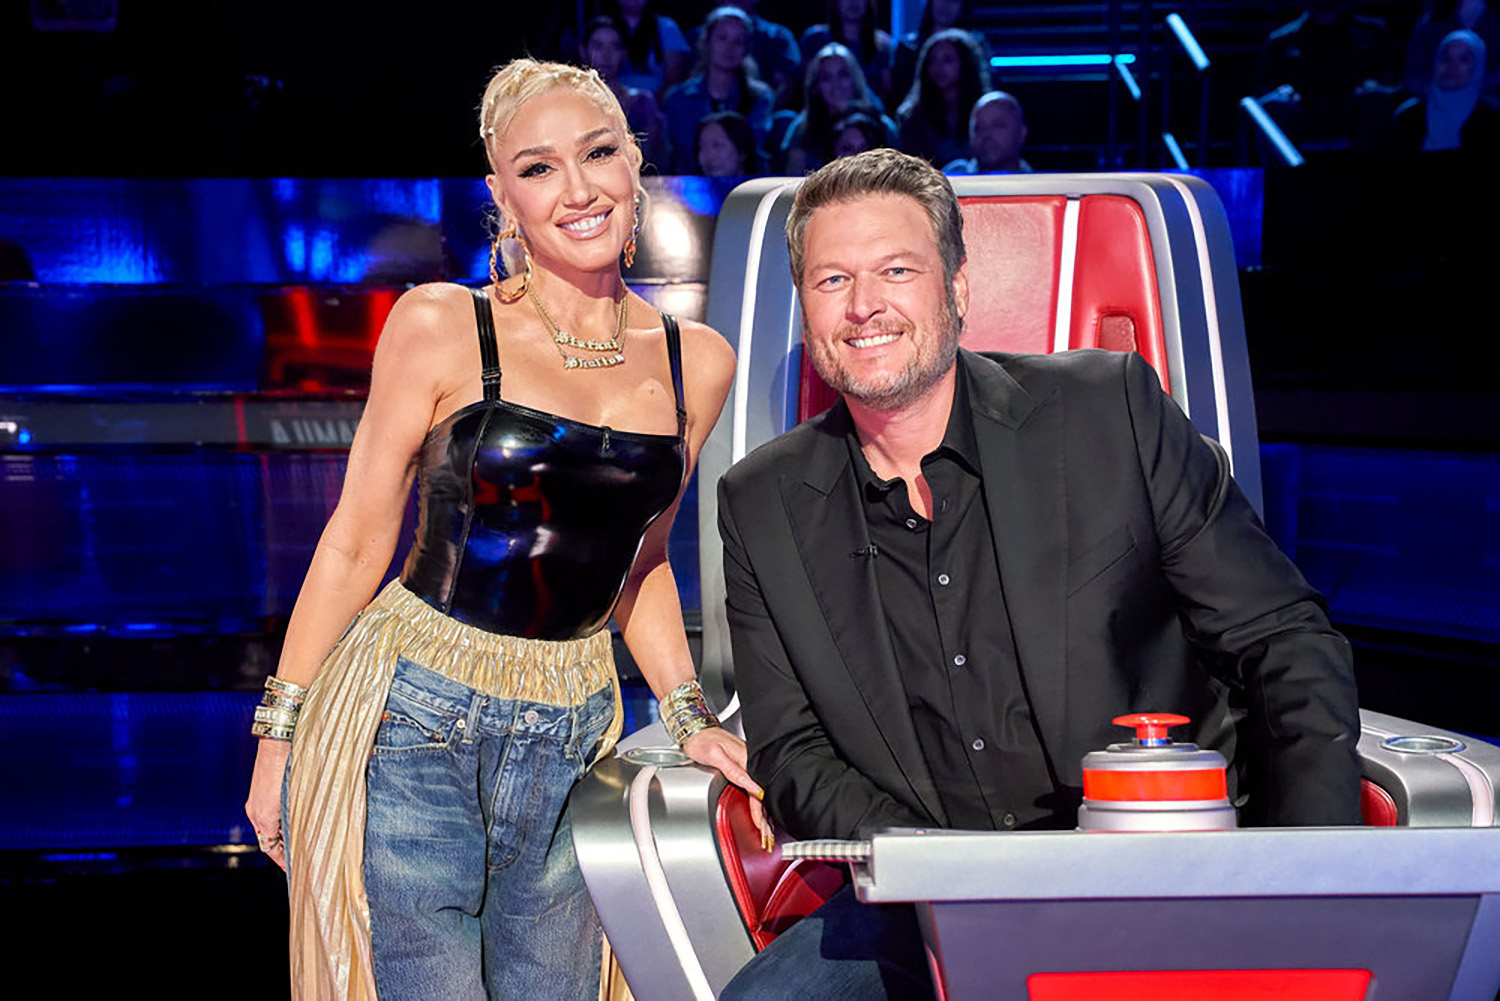 ‘The Voice’ Season 22: Gwen Stefani Admits She Turned Whenever Blake Shelton Did to ‘Mess With Him’ in the Blinds